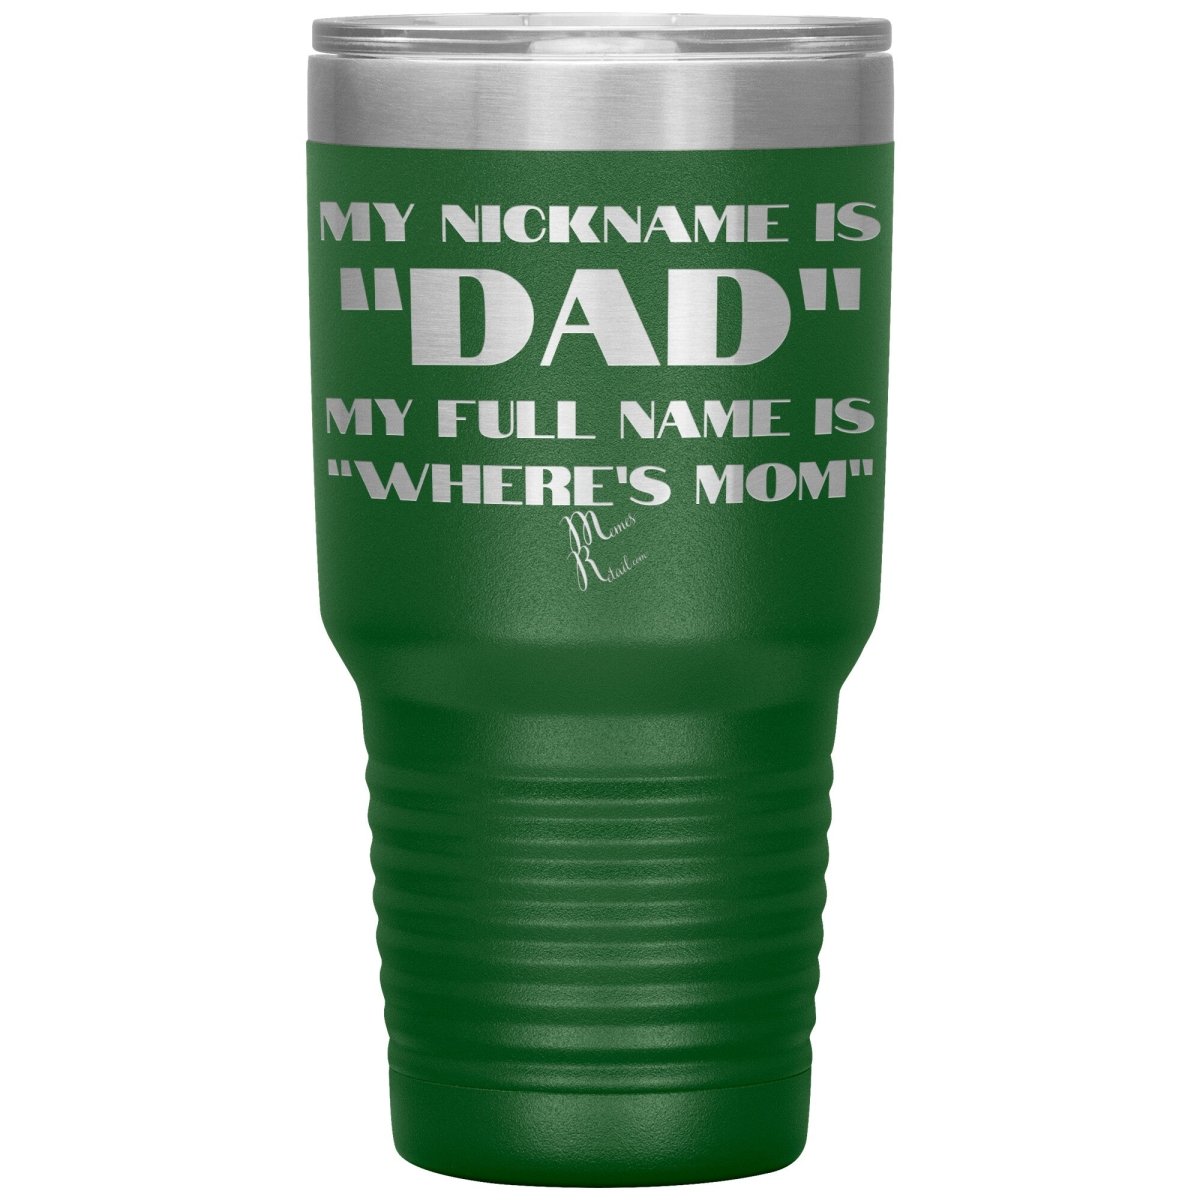 My Nickname is "Dad", My Full Name is "Where's Mom" Tumblers, 30oz Insulated Tumbler / Green - MemesRetail.com